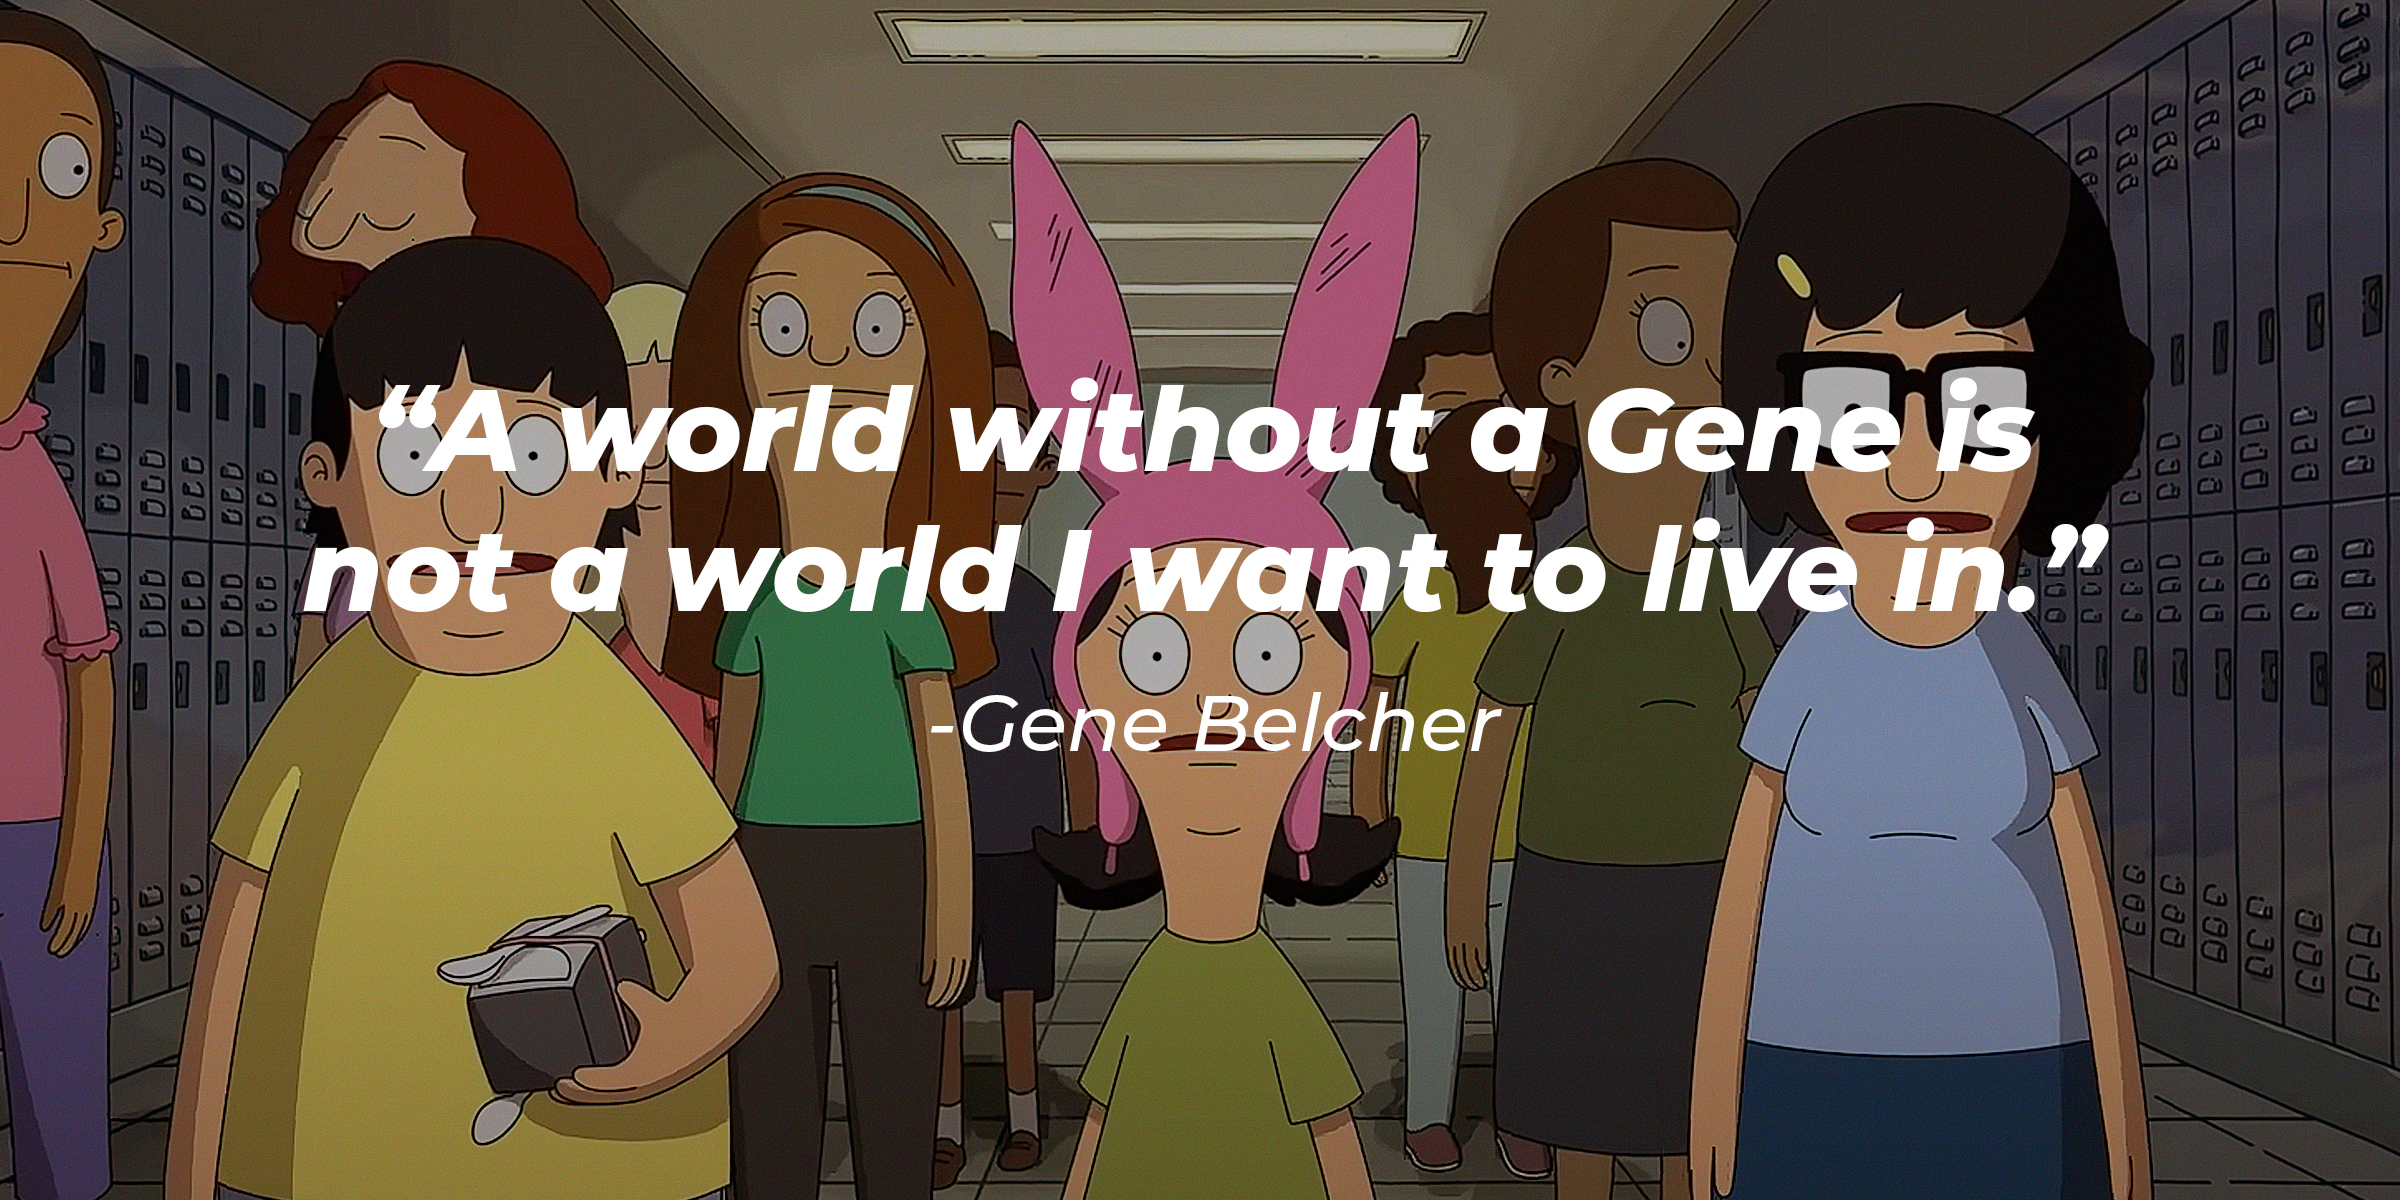 An image of Gene Belcher and his sister from "Bob's Burgers" with the quote: "A world without a Gene is not a world I want to live in." | Source: youtube.com/HollywoodRecordsVEVO